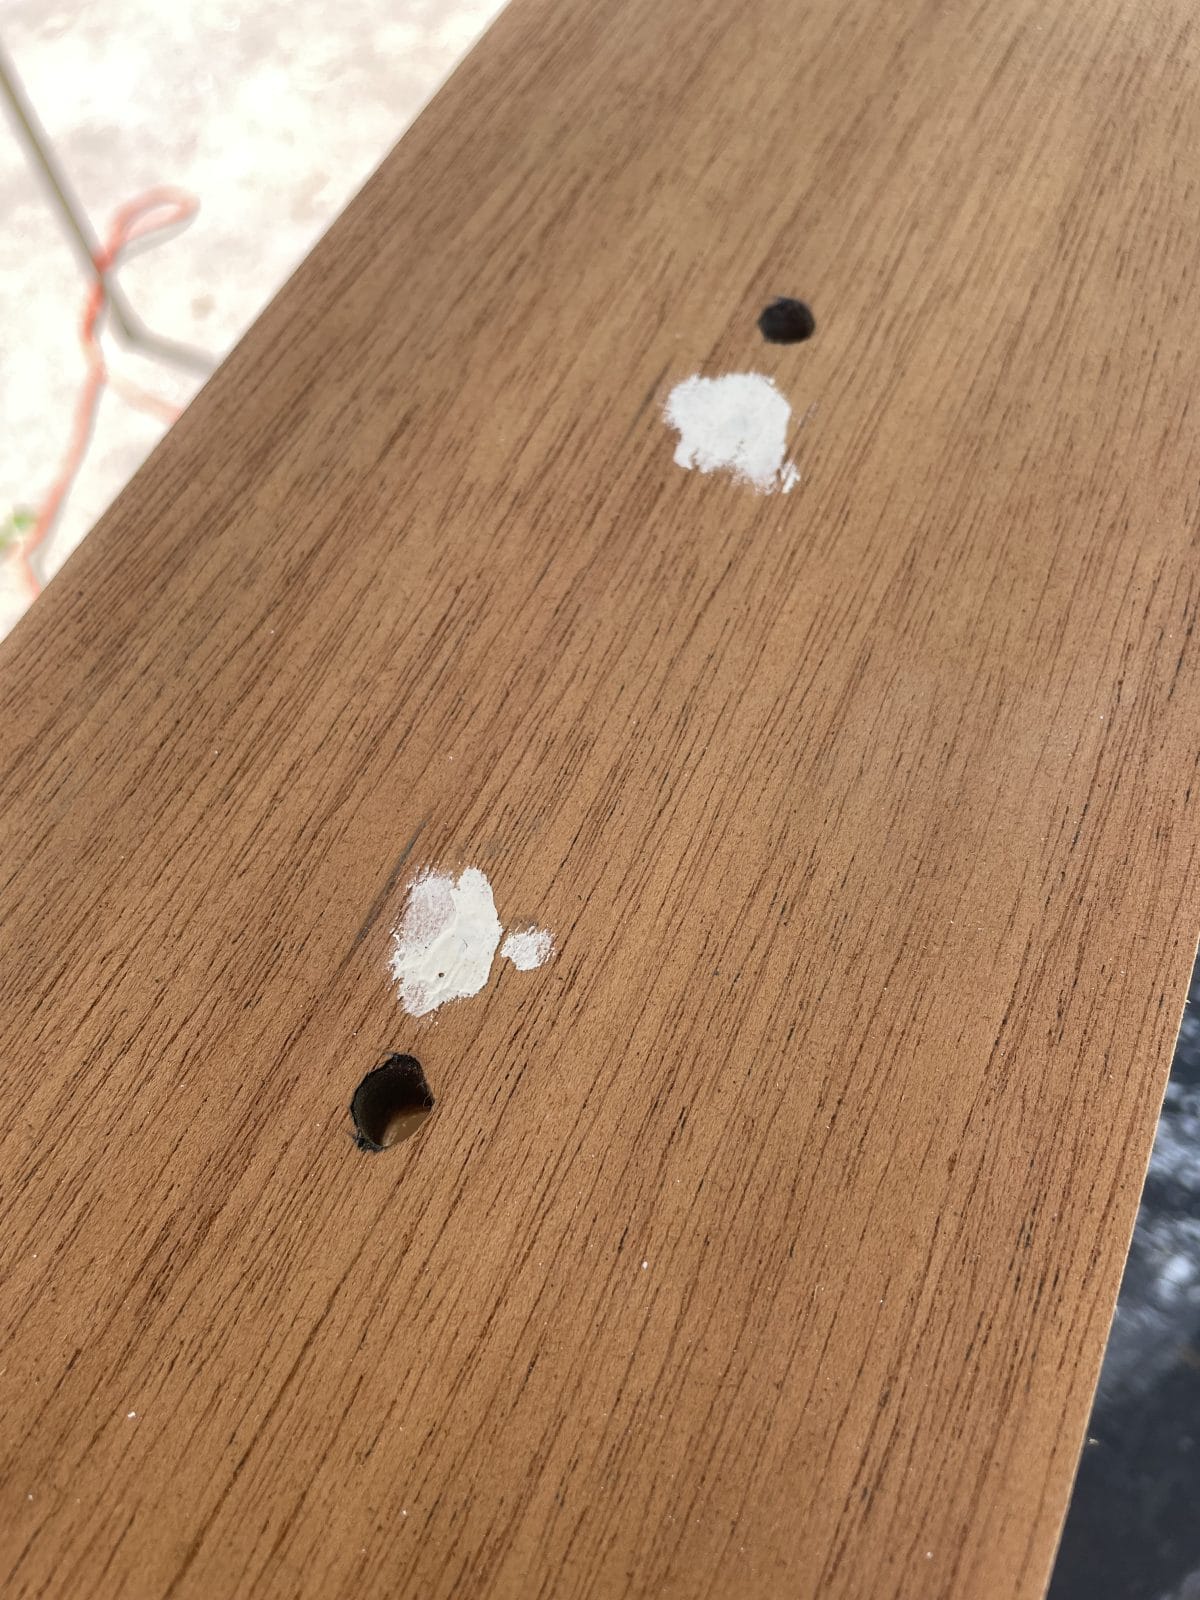 patched holes on drawer front